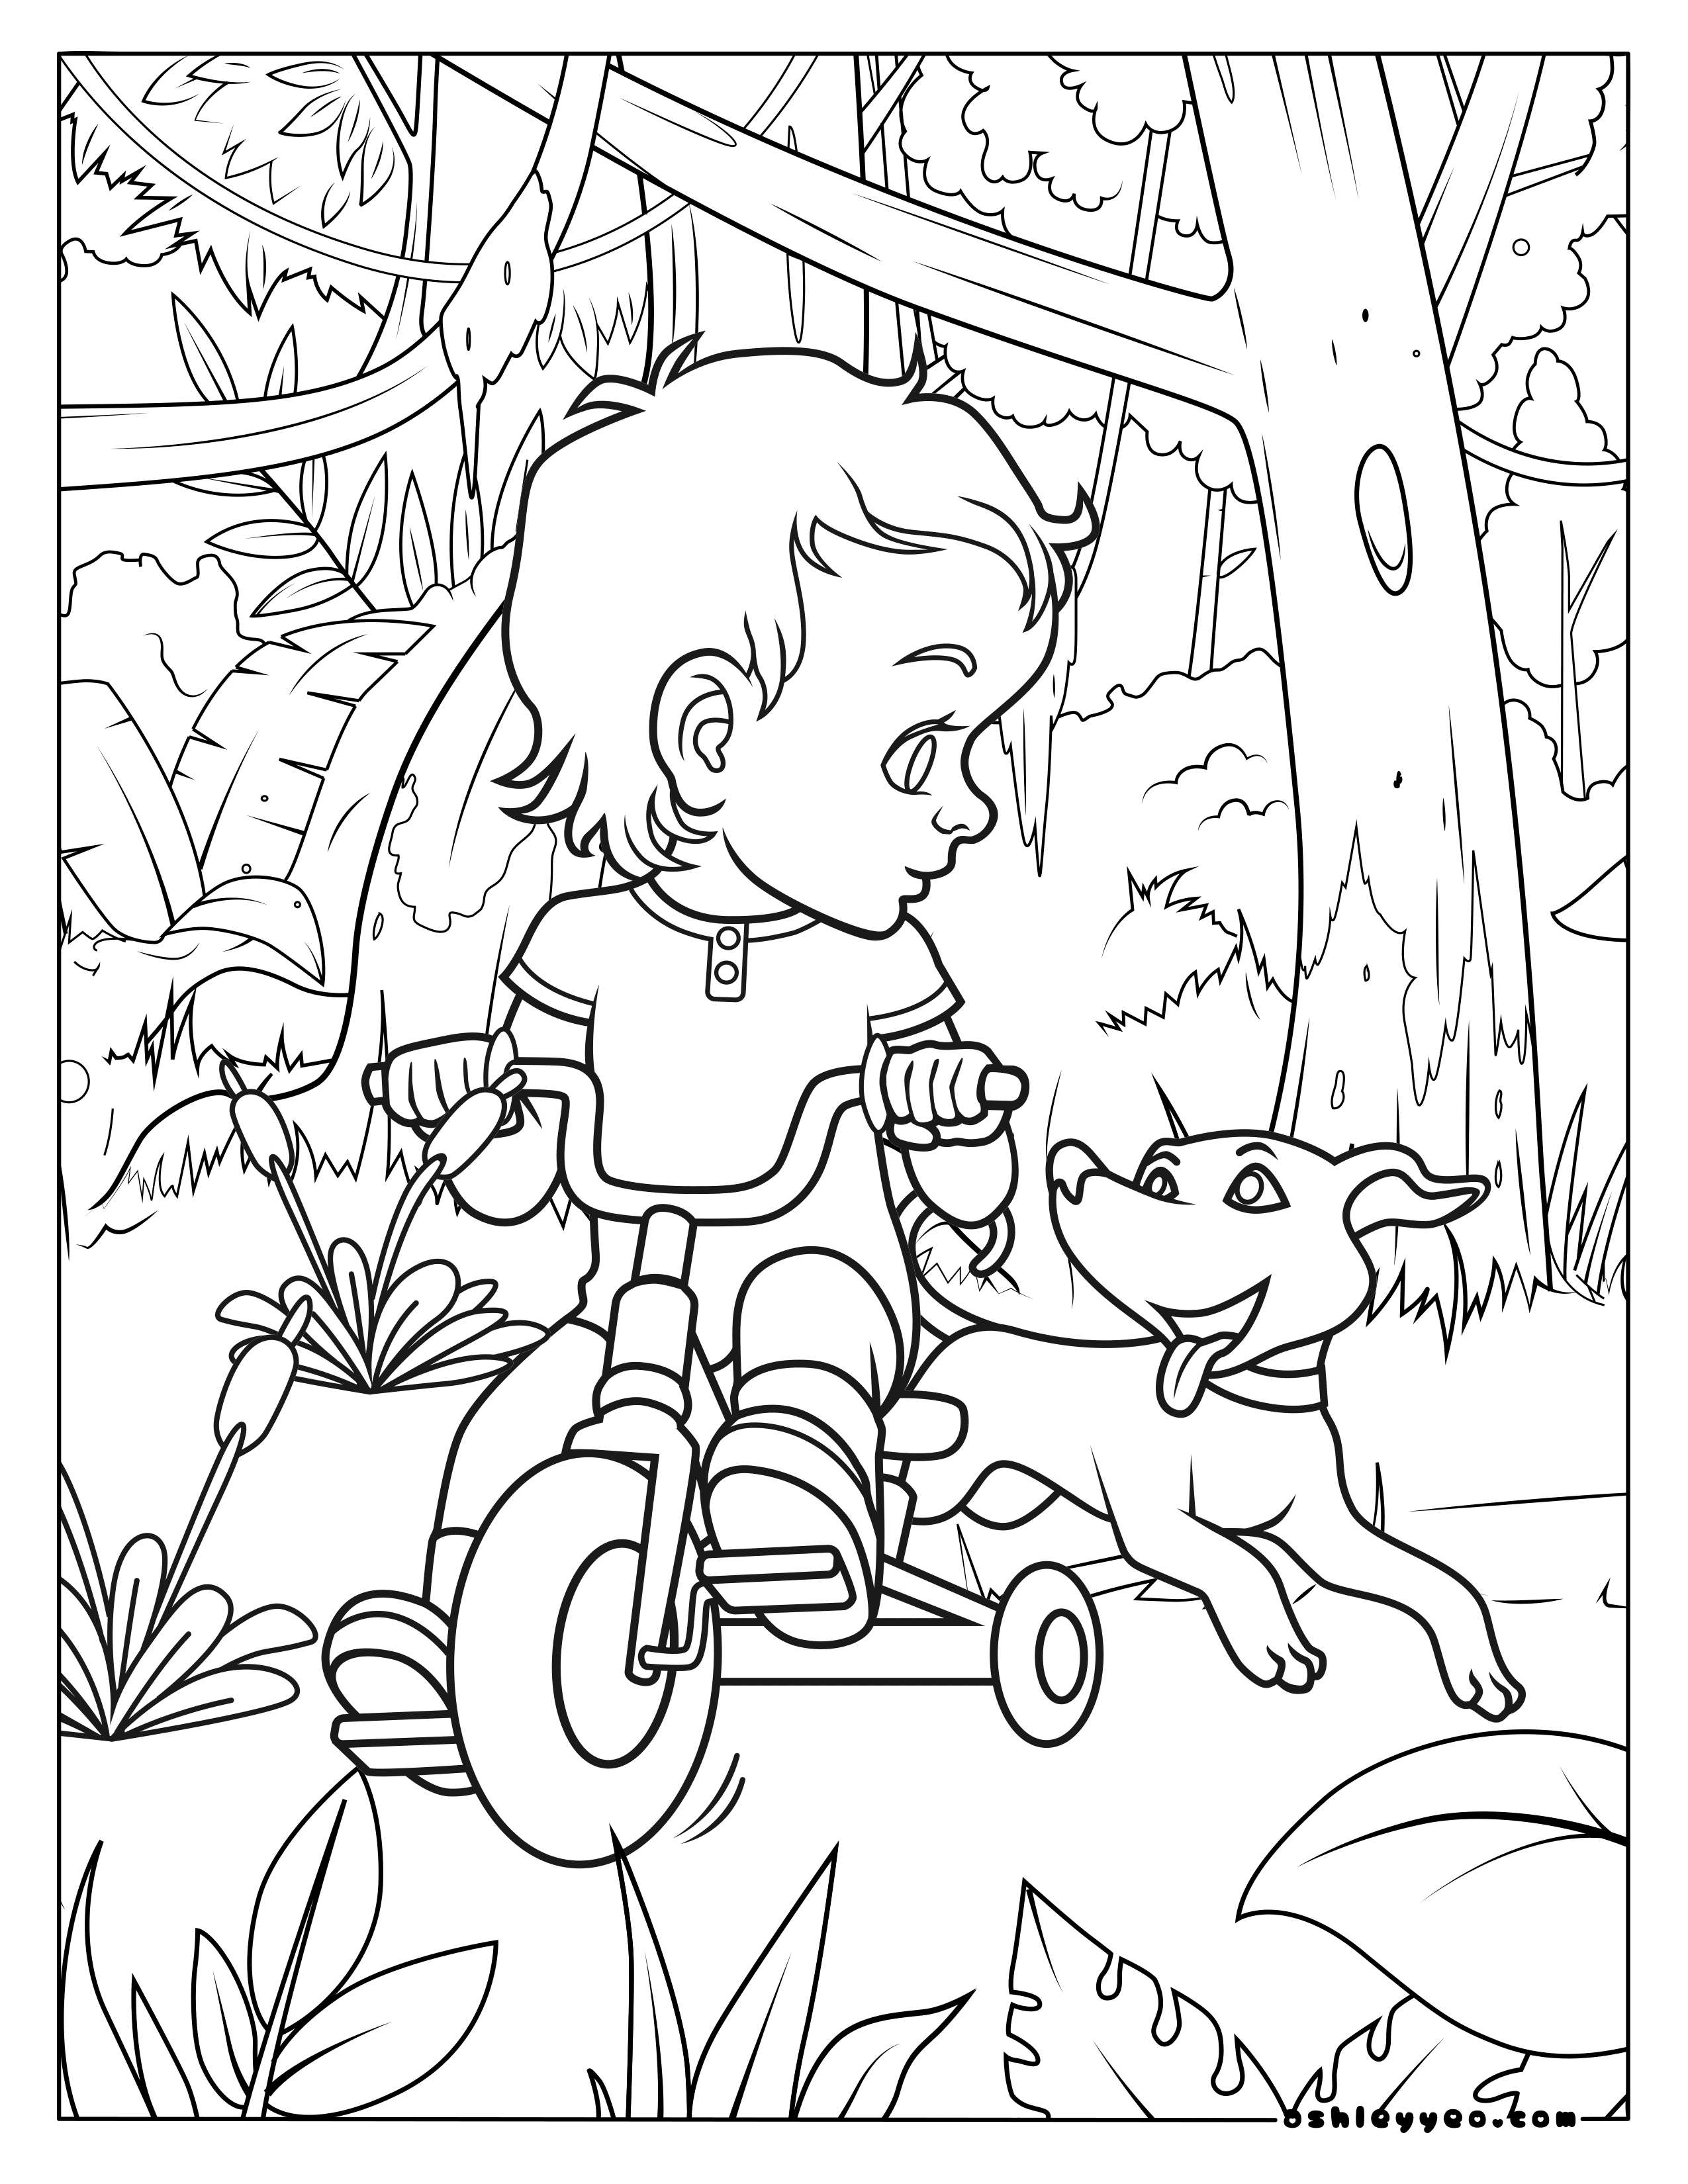 Free bike coloring pages for kids